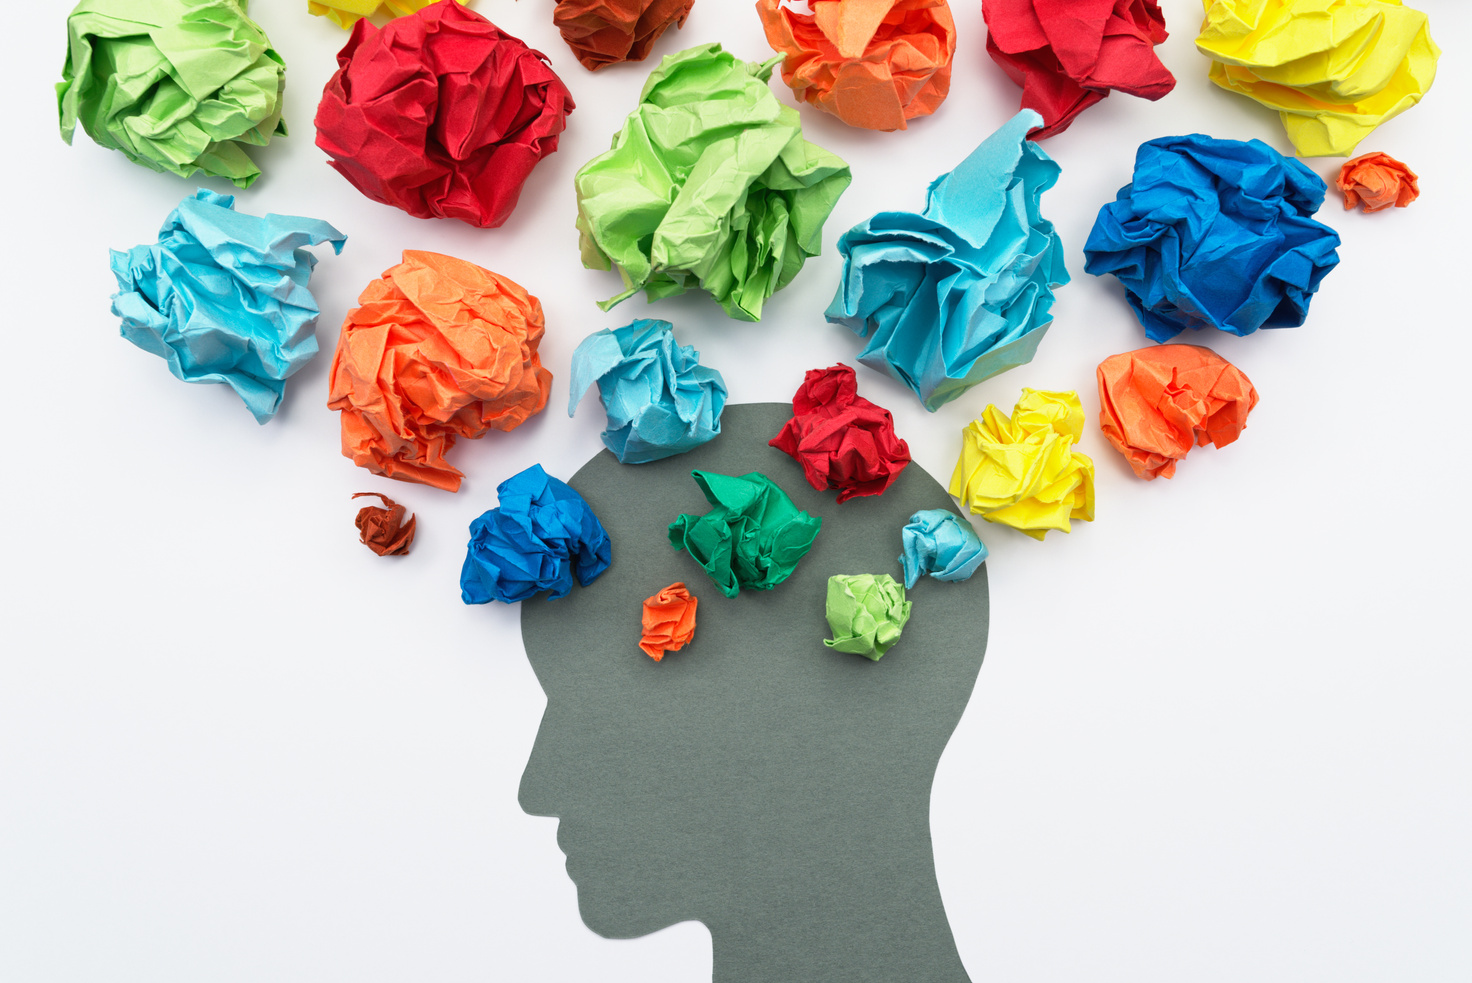 A mental health stock illustration of a person's head filled with colorful crumpled paper.